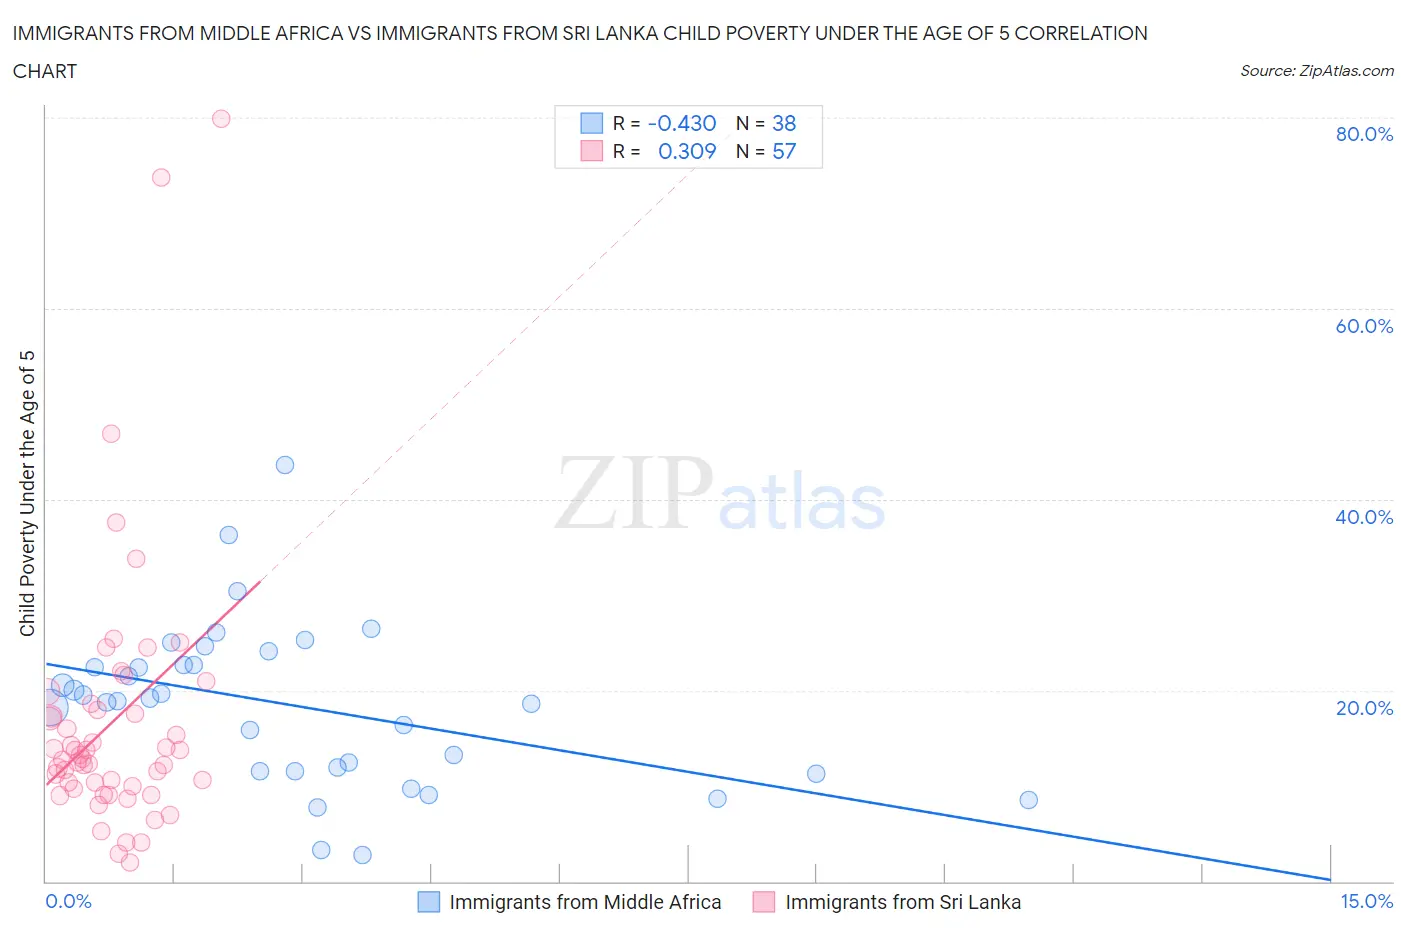 Immigrants from Middle Africa vs Immigrants from Sri Lanka Child Poverty Under the Age of 5